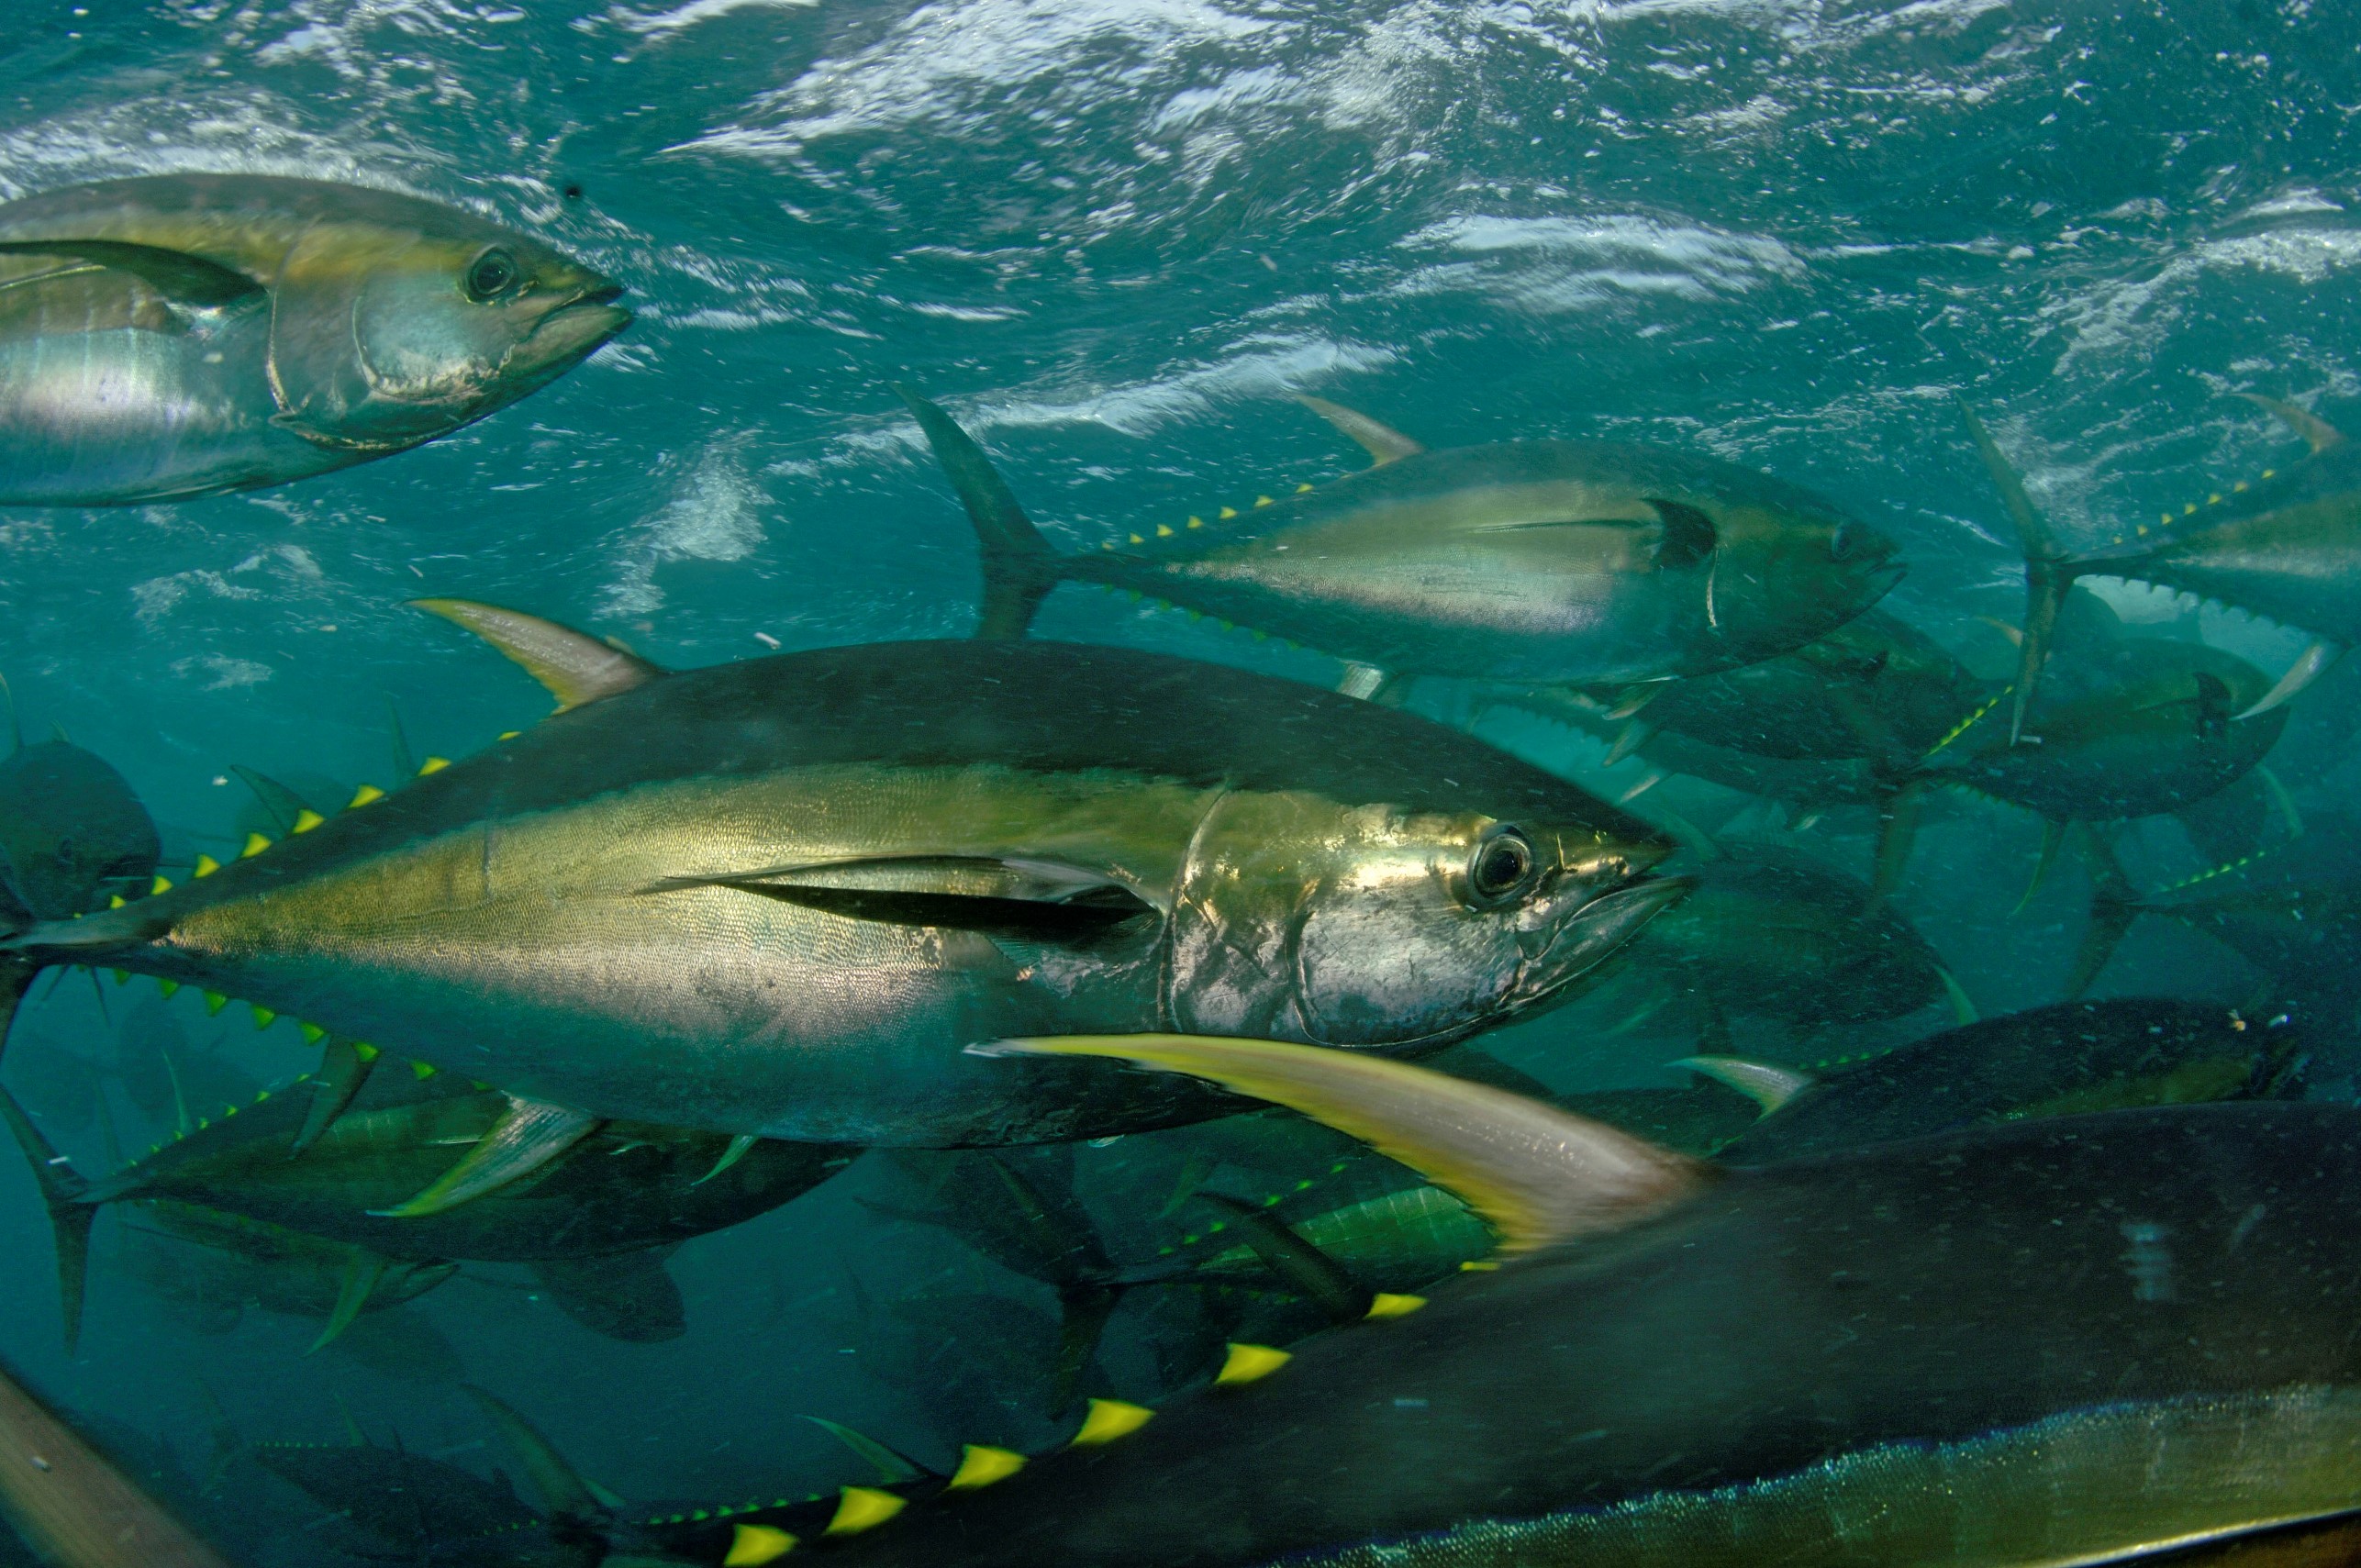 Tunas In The Ocean Photo And Wallpaper Cute